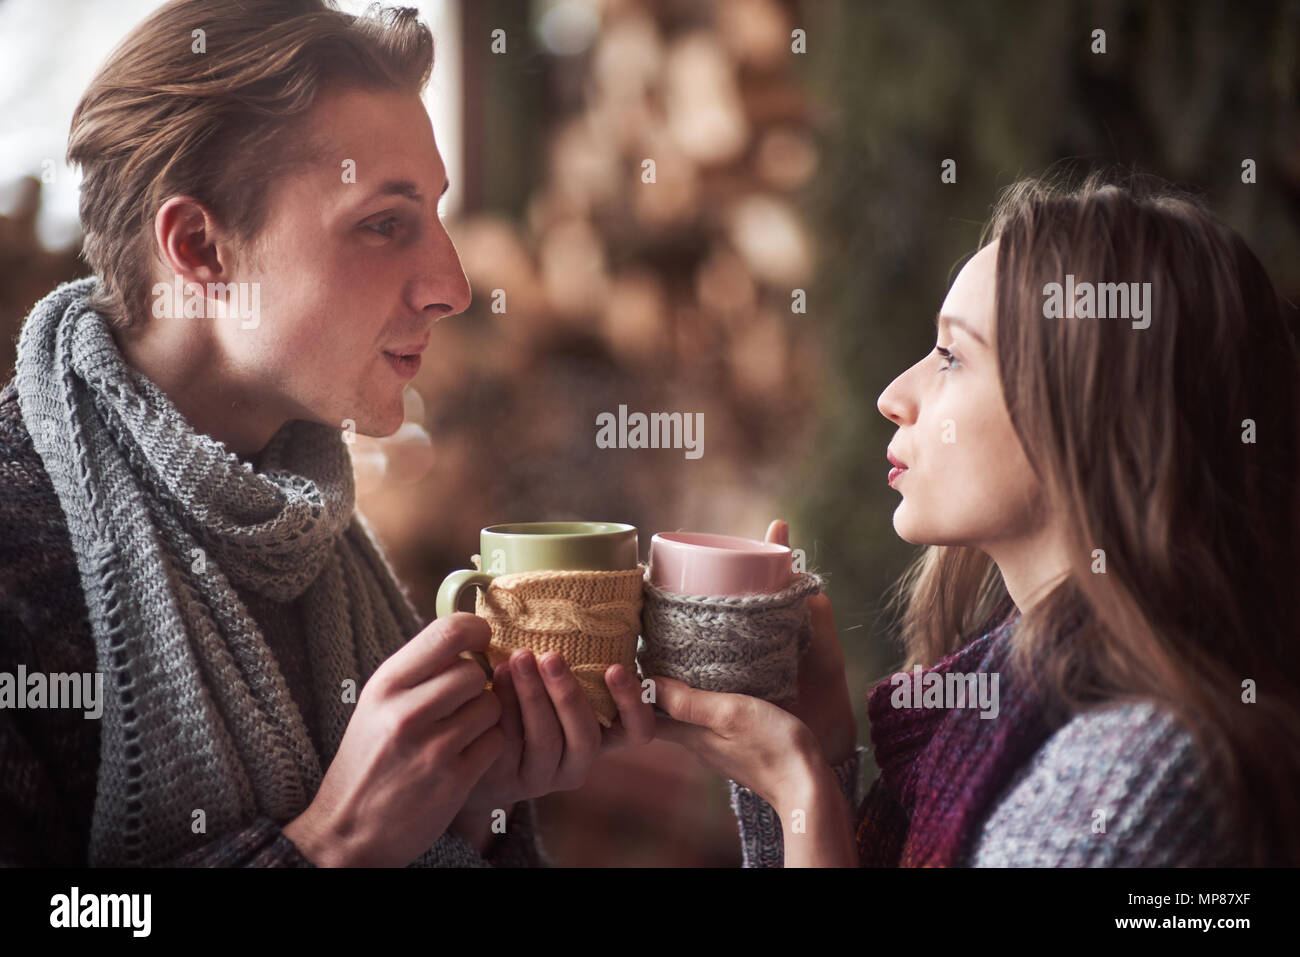 Photo of happy man and pretty woman with cups outdoor in winter. Winter holiday and vacation. Christmas couple of happy man and woman drink hot wine. Couple in love Stock Photo